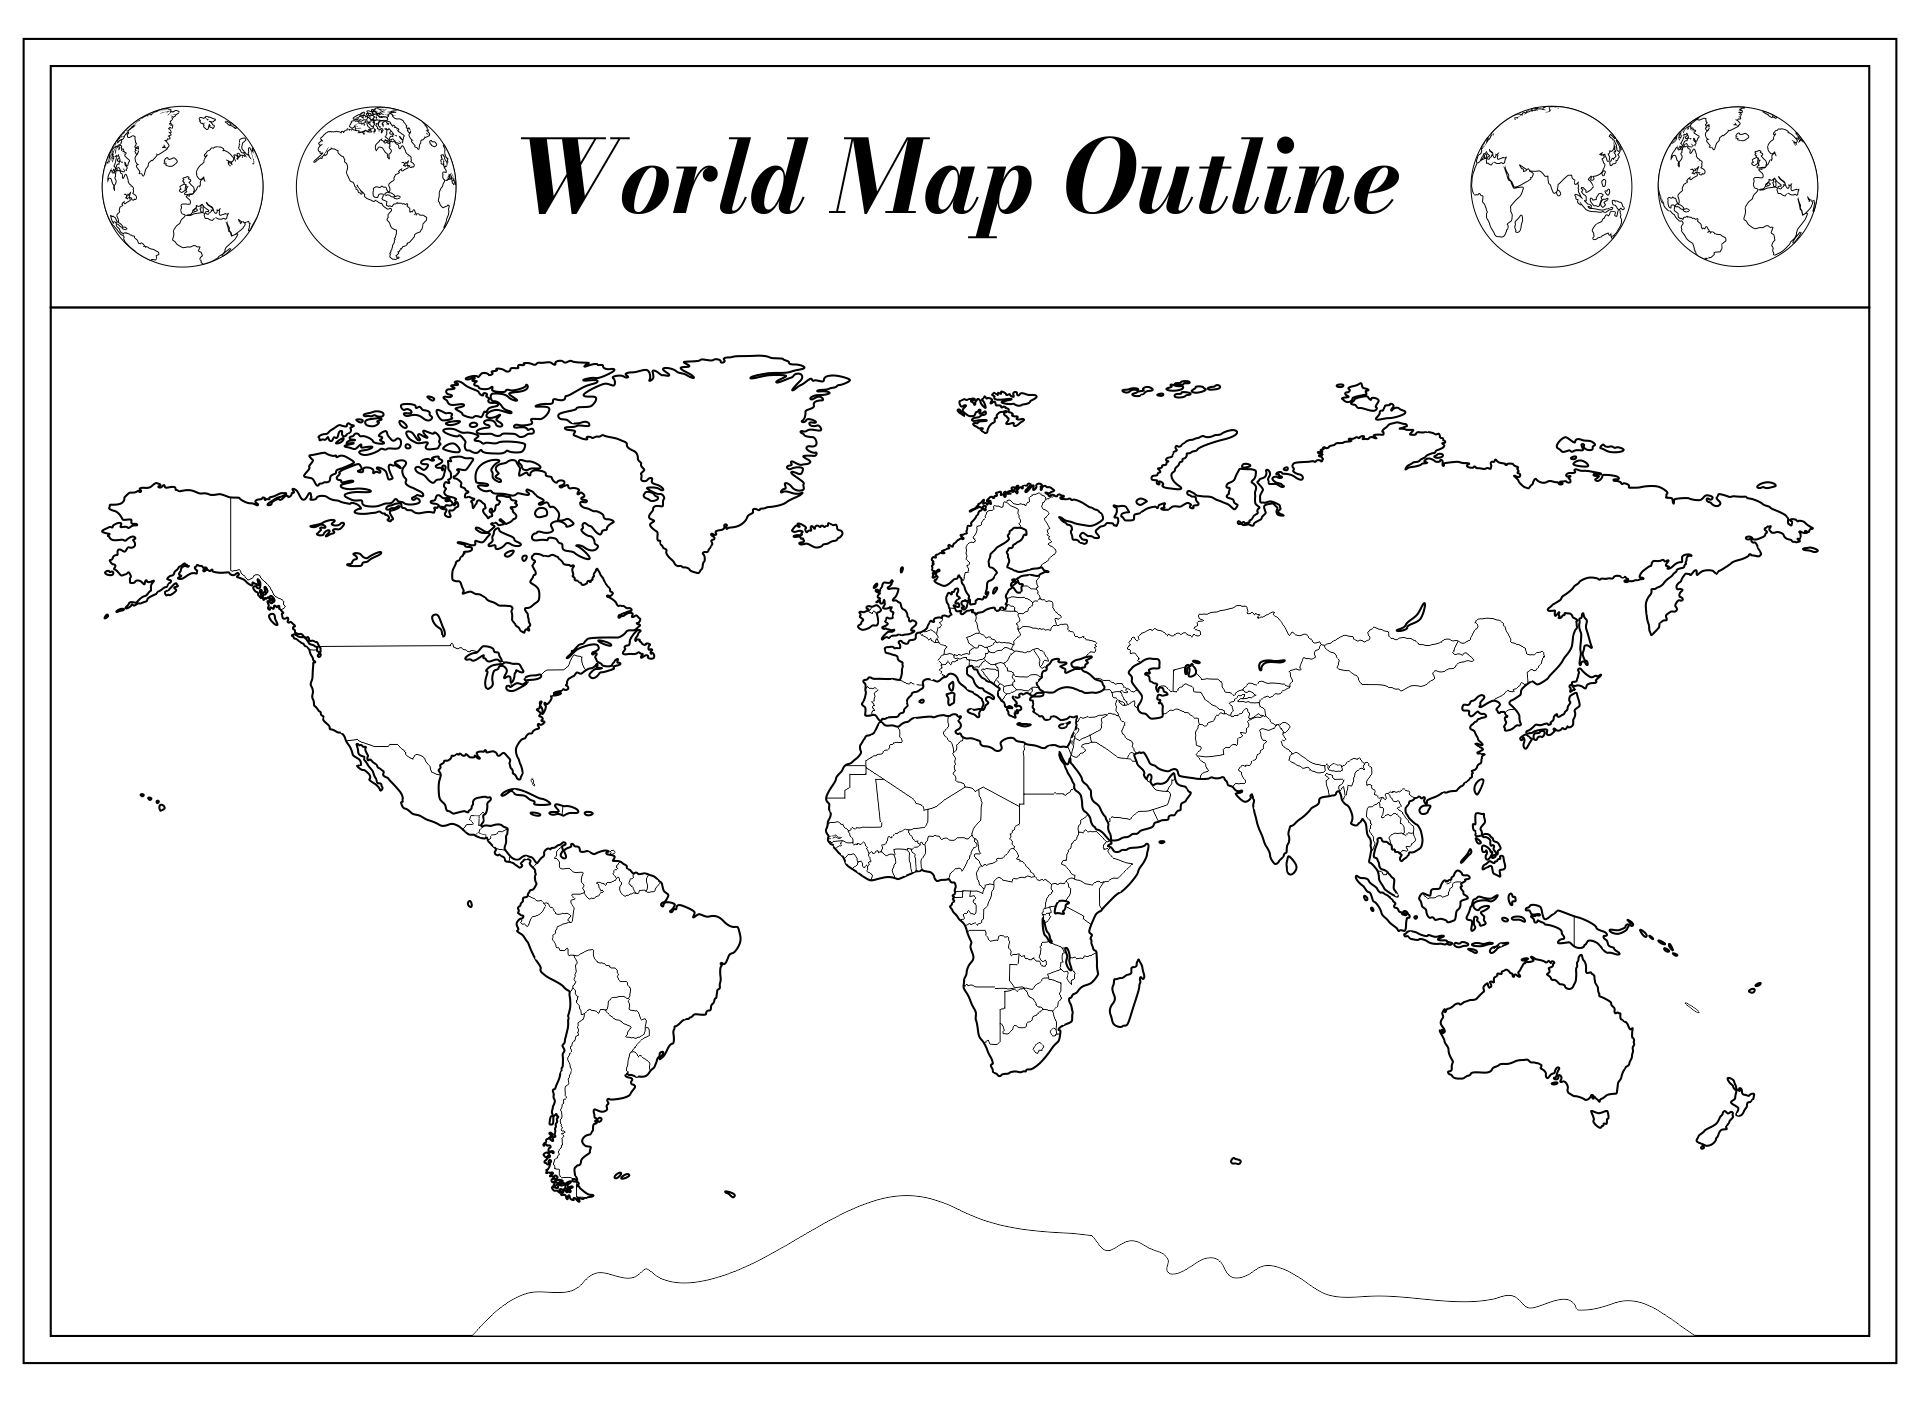 A4 Size World Map Outline